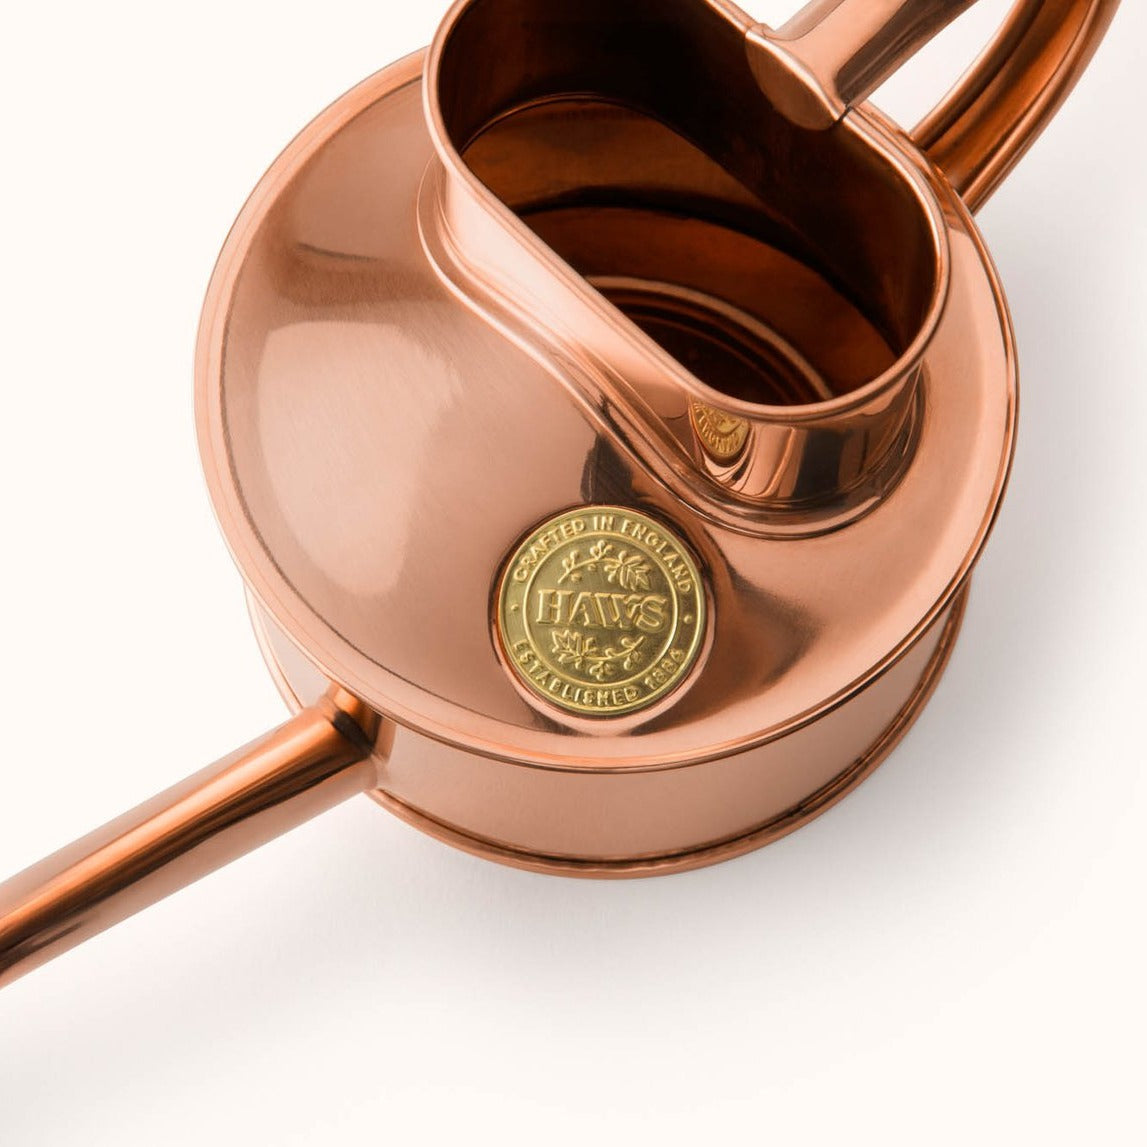 Handcrafted from polished copper in the Haws 100 year old classic shape.